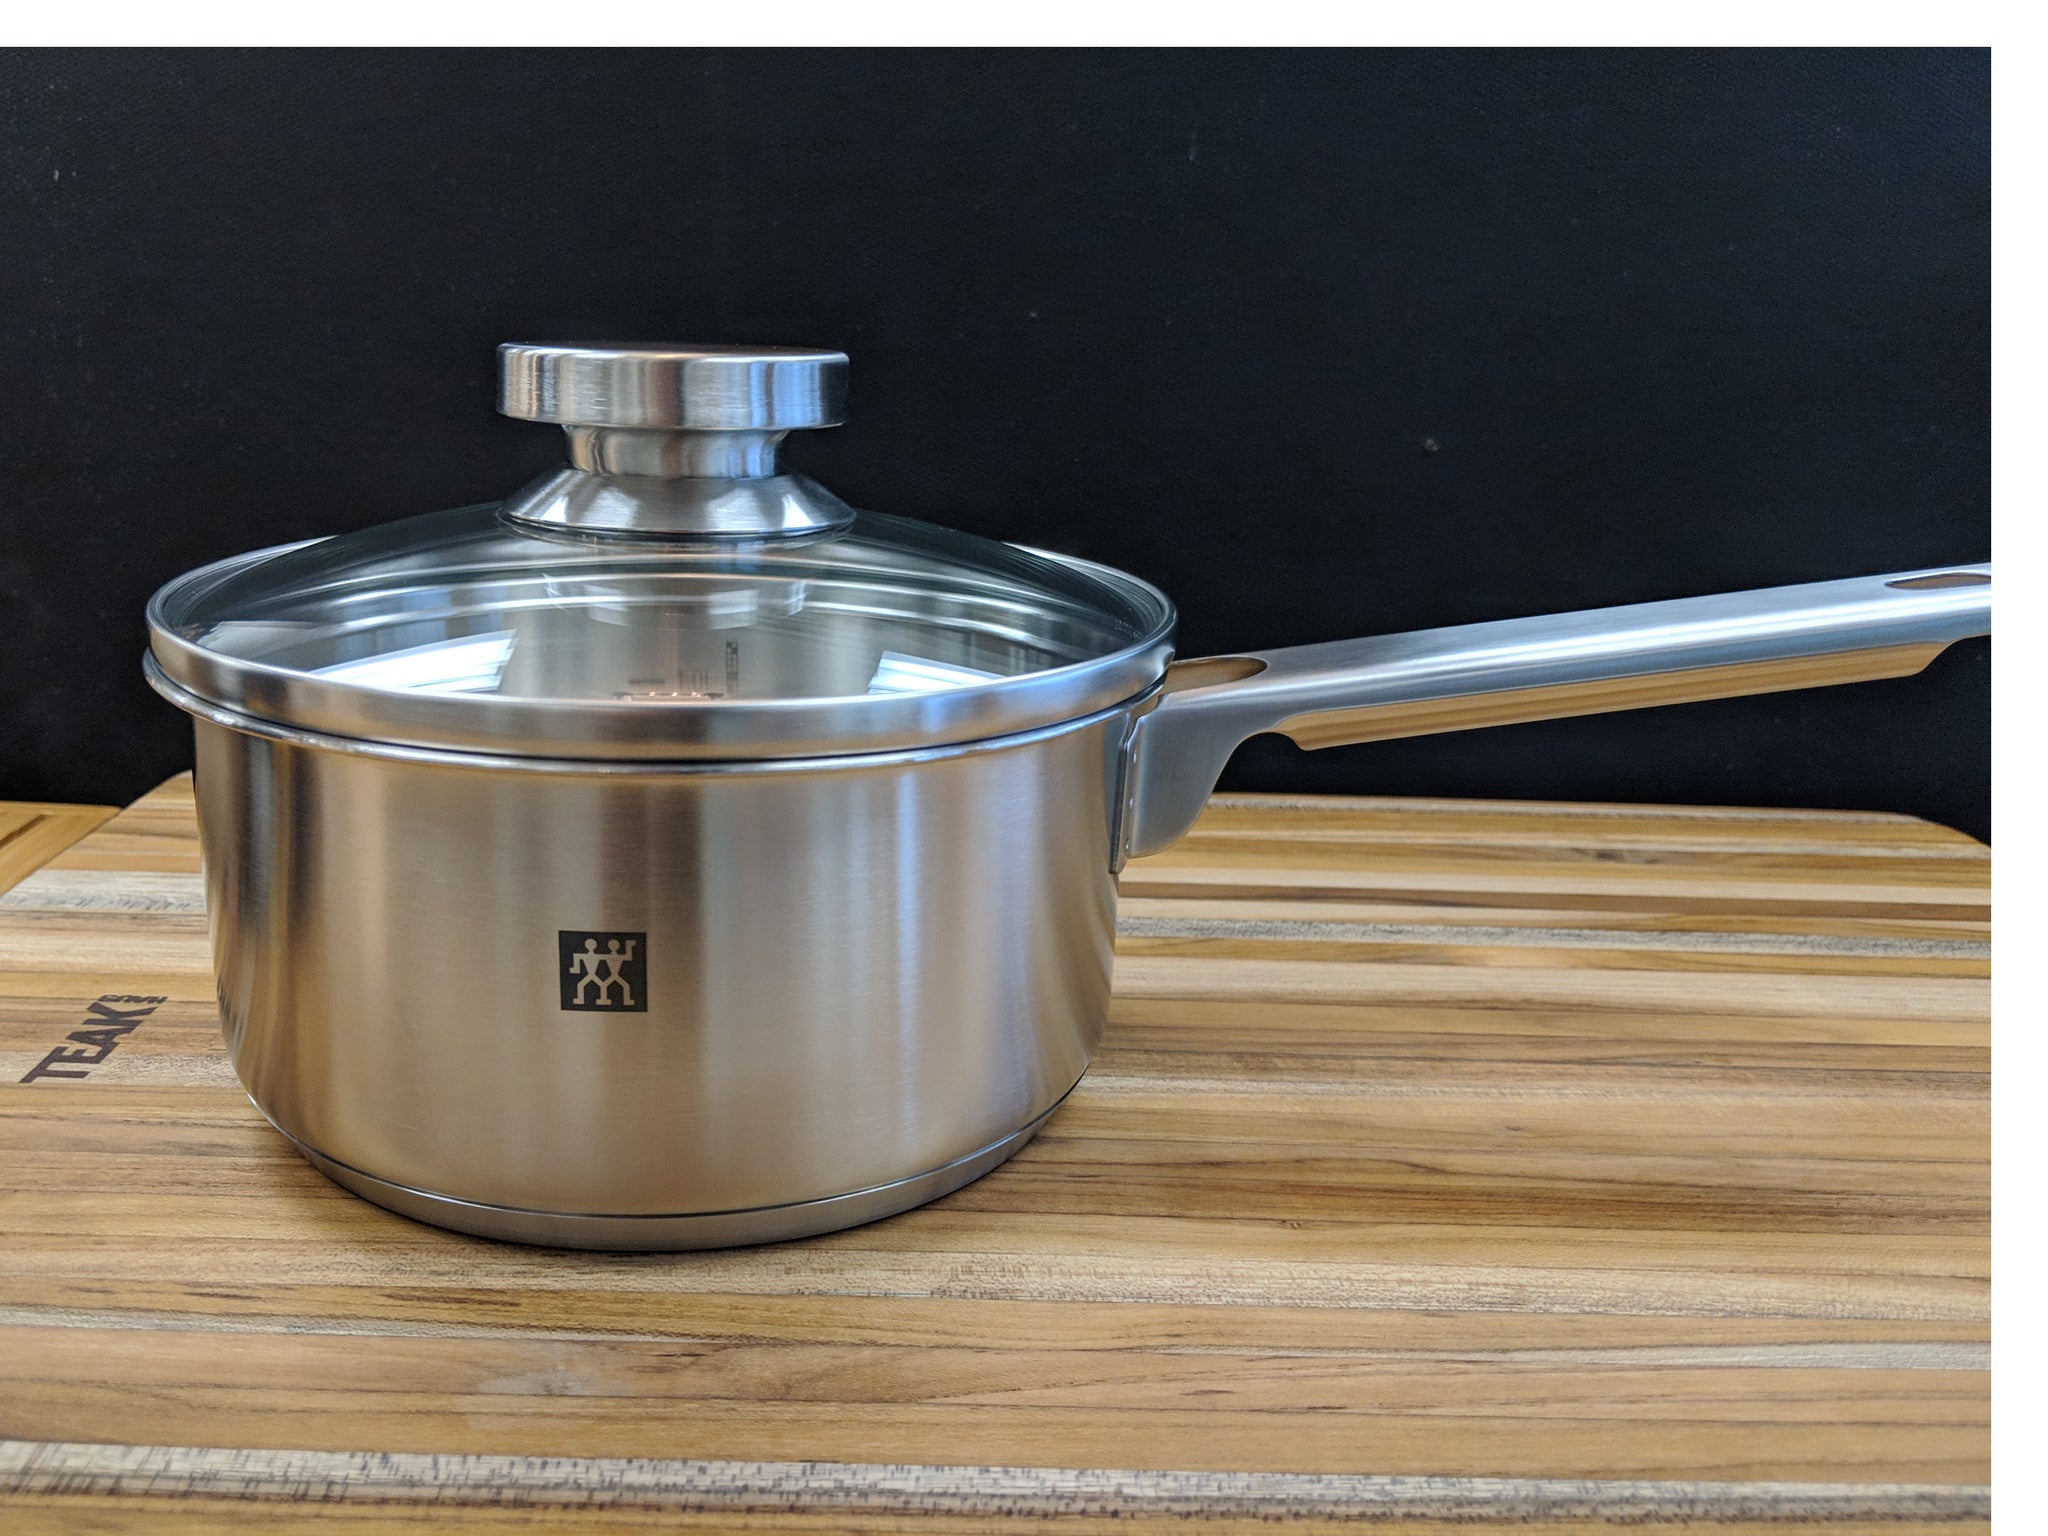 Joy Stainless Steel Saucepan With Lid - 1.6qt